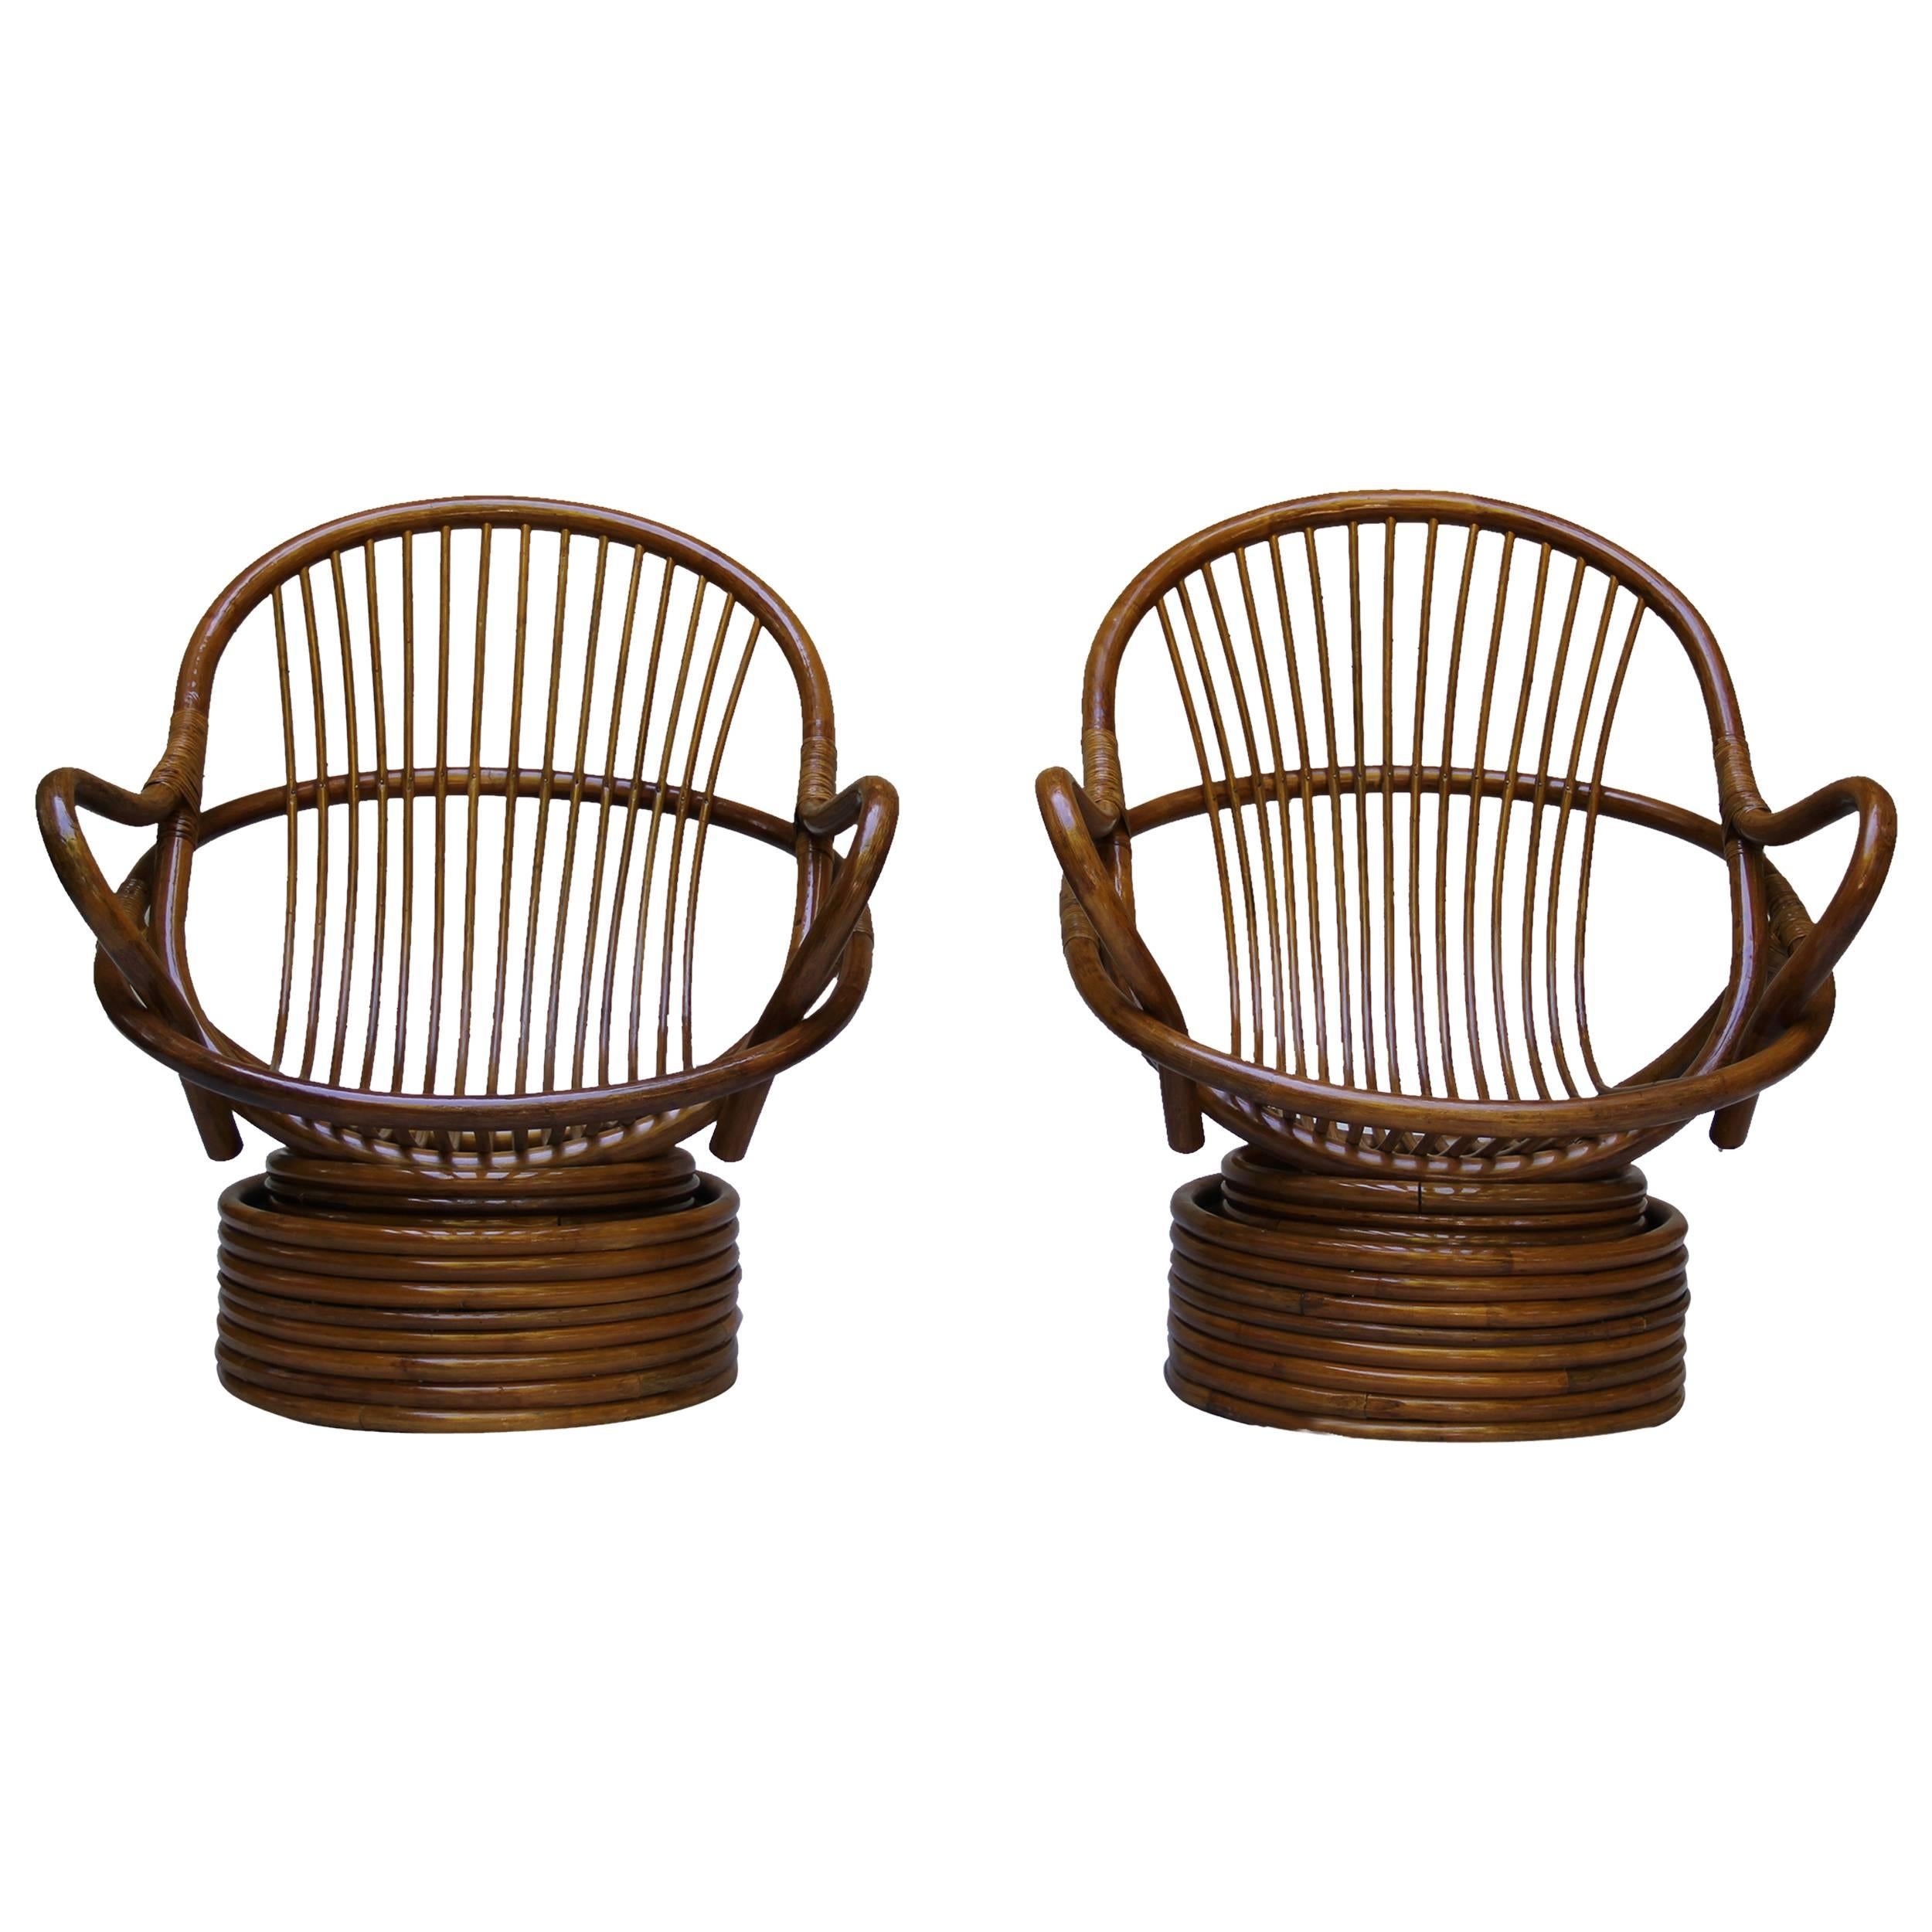 A beautiful pair of bamboo rattan swivel chairs. Manufactured by Sun Products of Vernon California. The Classic Californian lounge chair.
New upholstery and in excellent condition. 
To view please make an appointment at our Laguna Beach location.